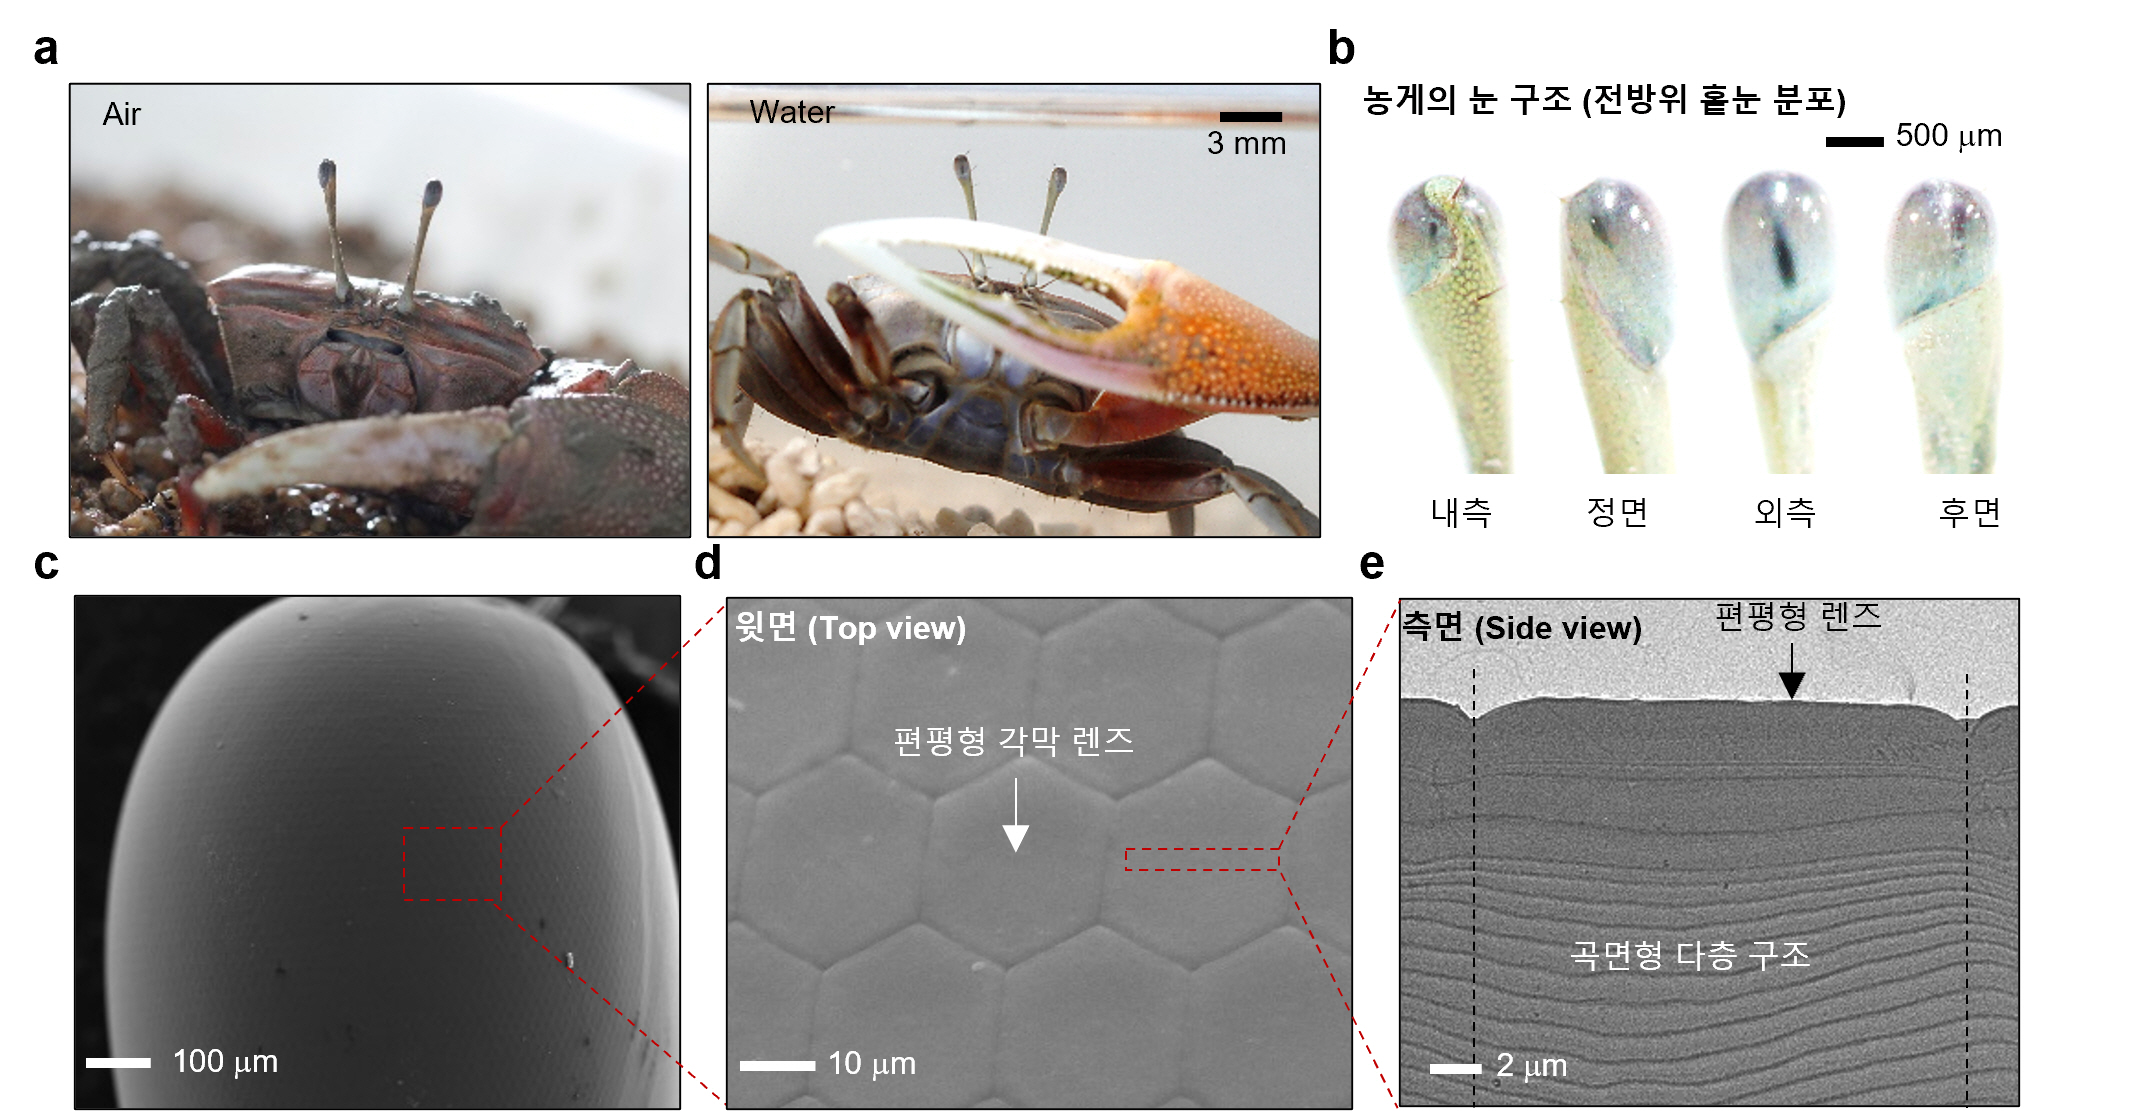 Professor Young Min Song's joint research team develops an ultra-small amphibious camera capable of shooting 360 degrees 이미지